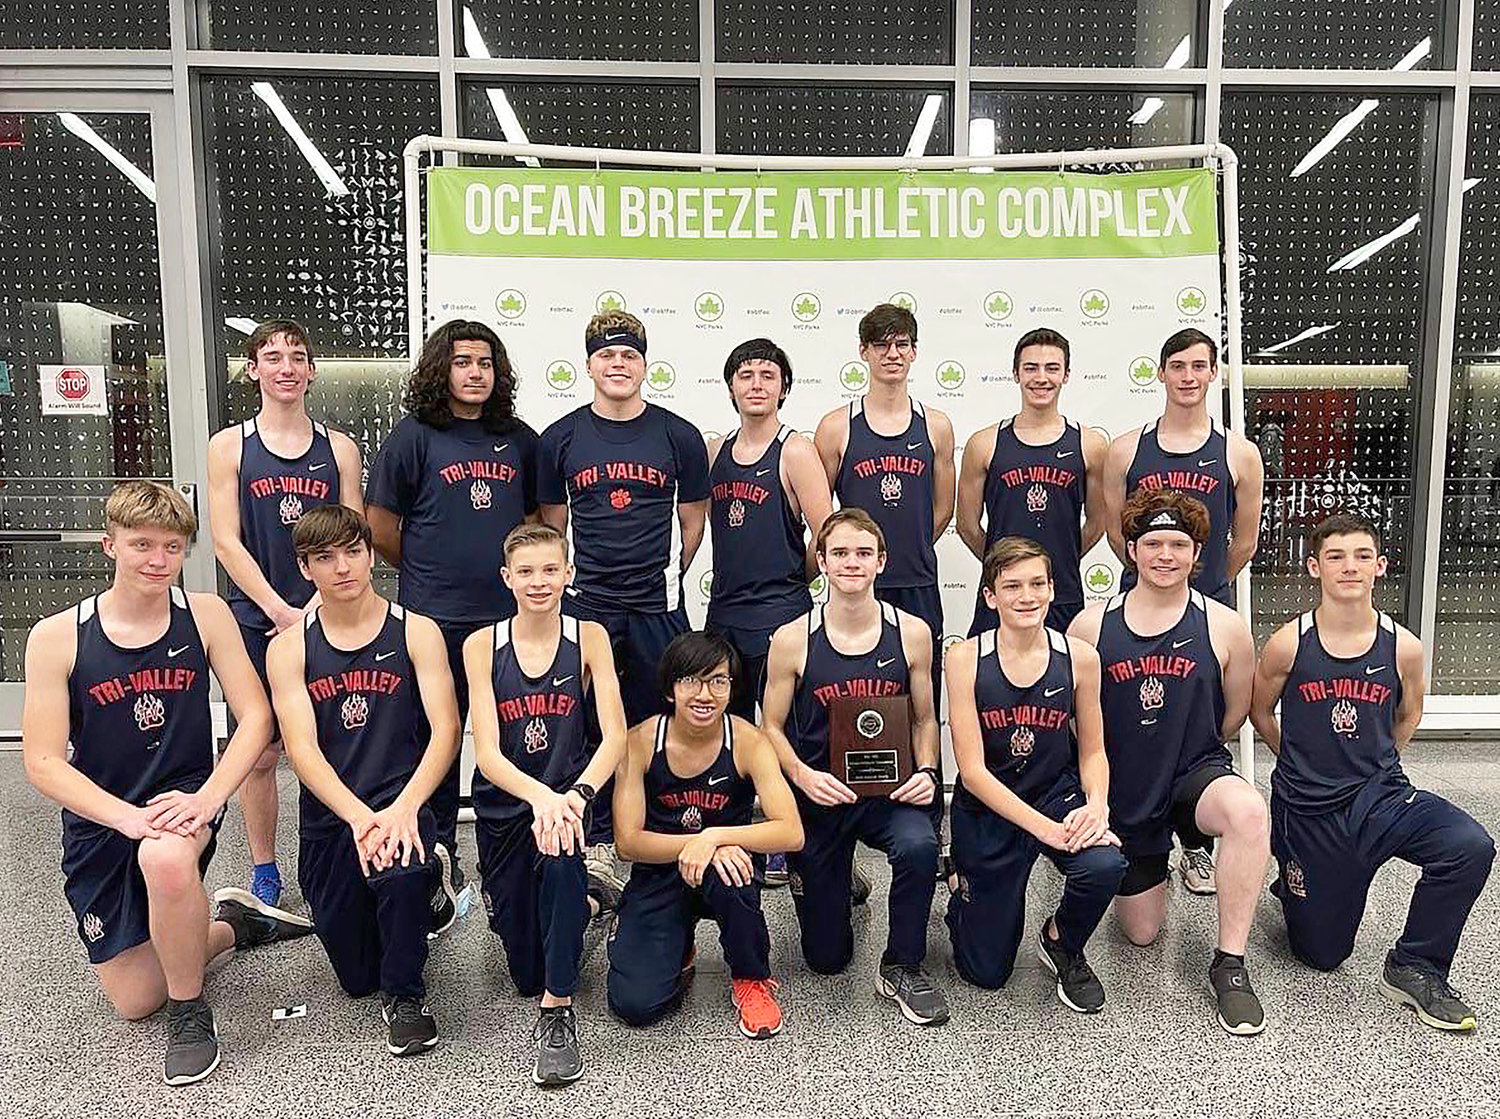 At left: top left- Vincent Mingo, Armaan Butler, Brandon Kaplan, Michael Squires, Caleb Edwards, Connor Weyant and Jacob Lucak. Bottom: Talan Scanna, Noah Edwards, Van Furman, Kristoff Guanzon, Craig Costa, Nicholas Bender, Connor Rafferty, Tyler Conjura. Not pictured Adam Furman who didn’t compete as he was a little under the weather. He will be at the state qualifier having already met the standard in the 3200.